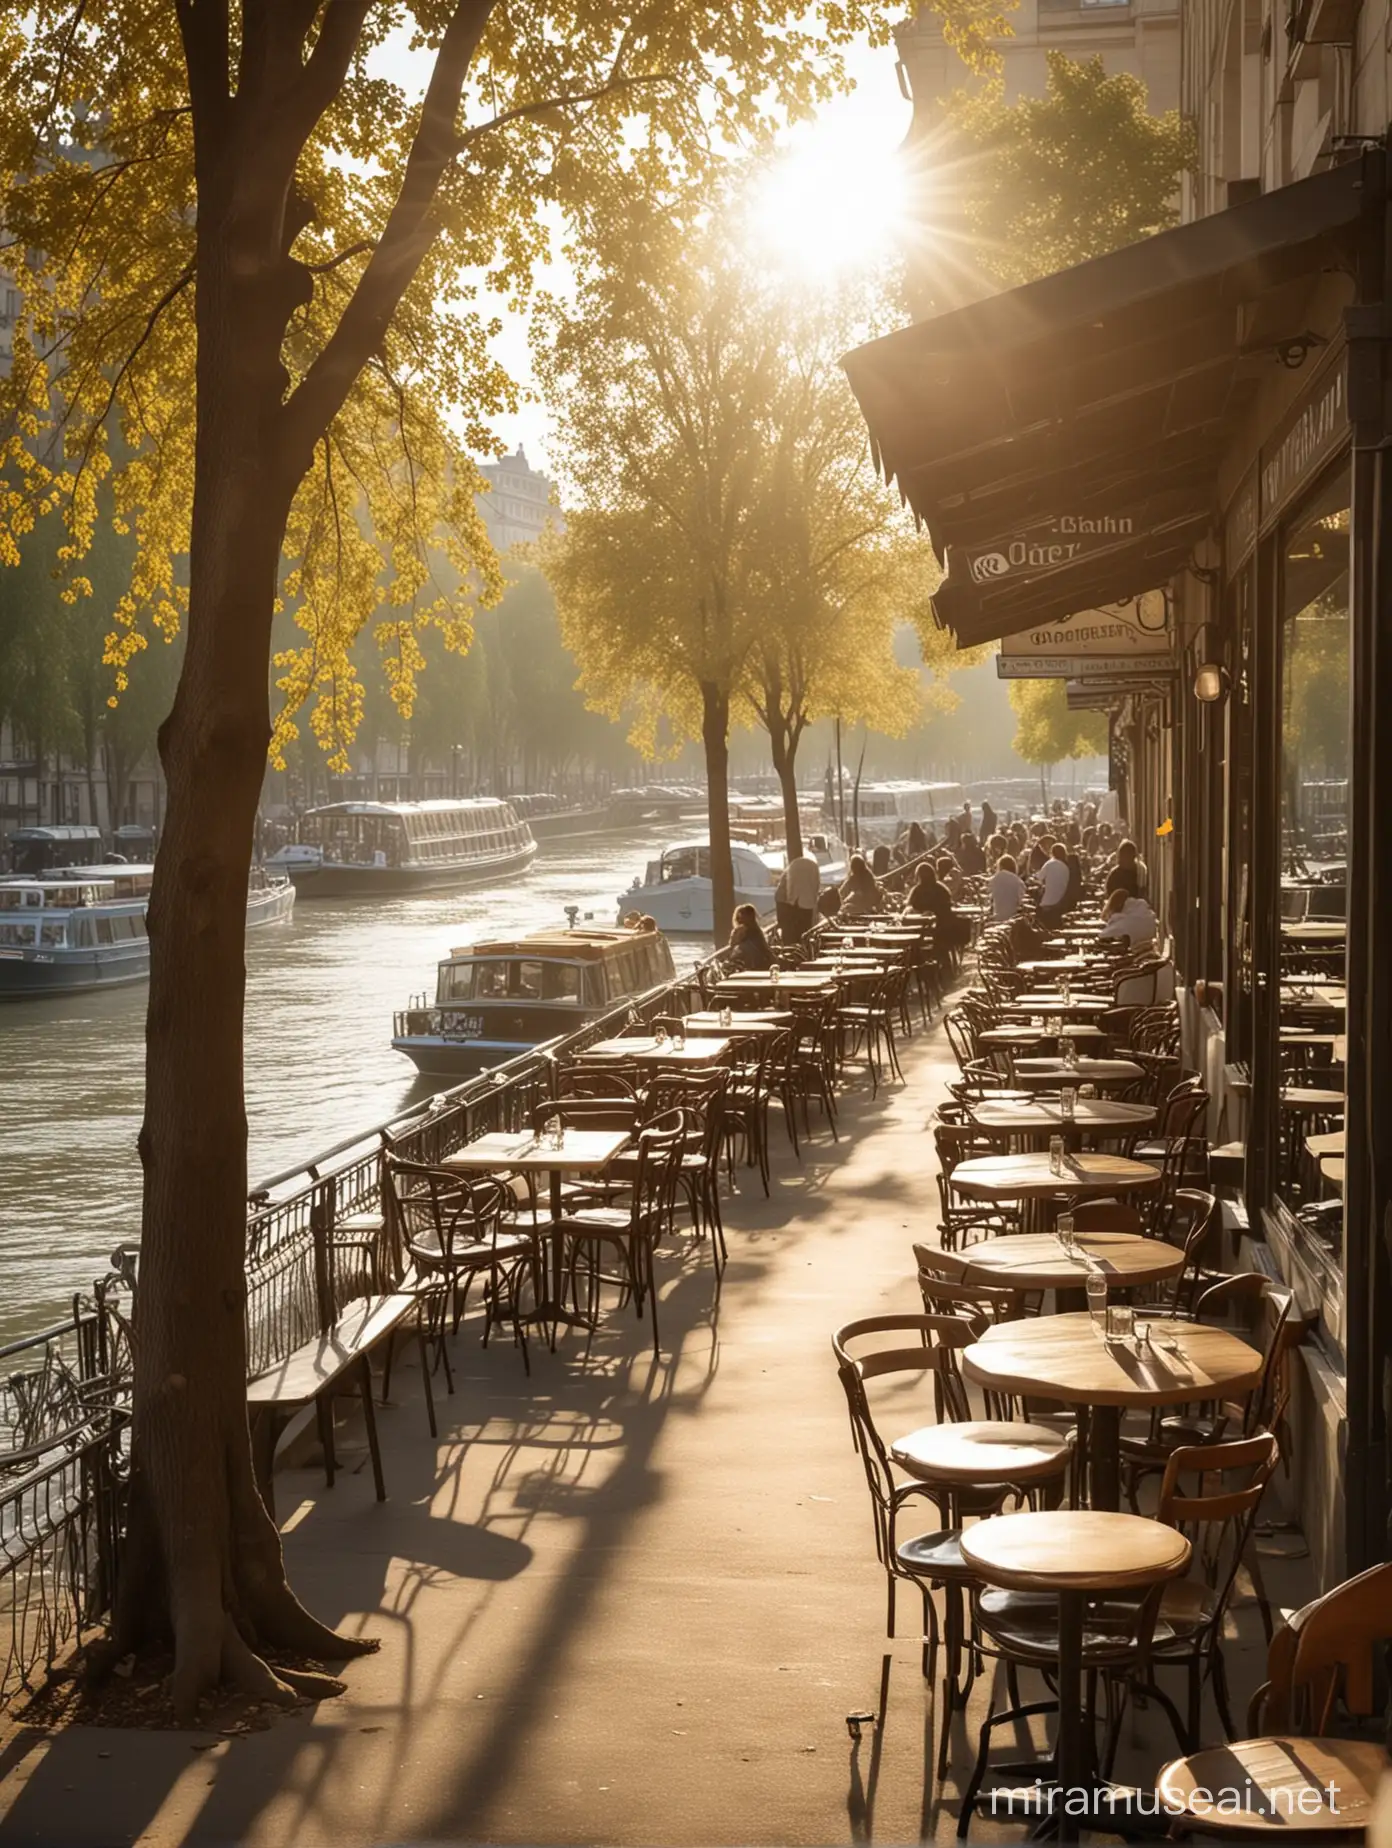 Sunlit Coffee Shop by the Seine River A Scene of Happiness and Fulfillment